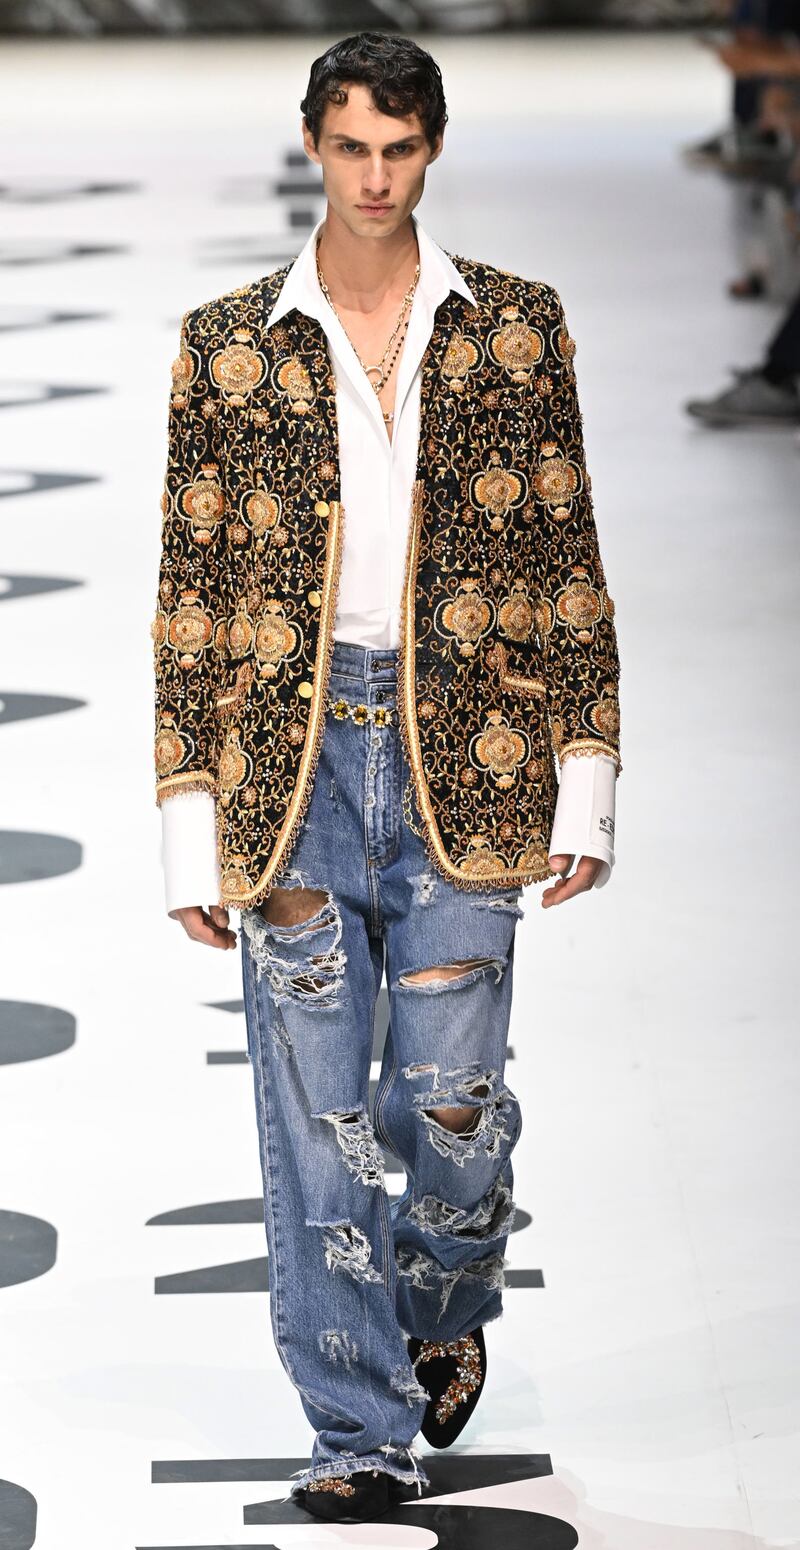 Slashed jeans and an embroidered jacket at the Dolce & Gabbana spring/summer 2023 menswear show. Photo: EPA